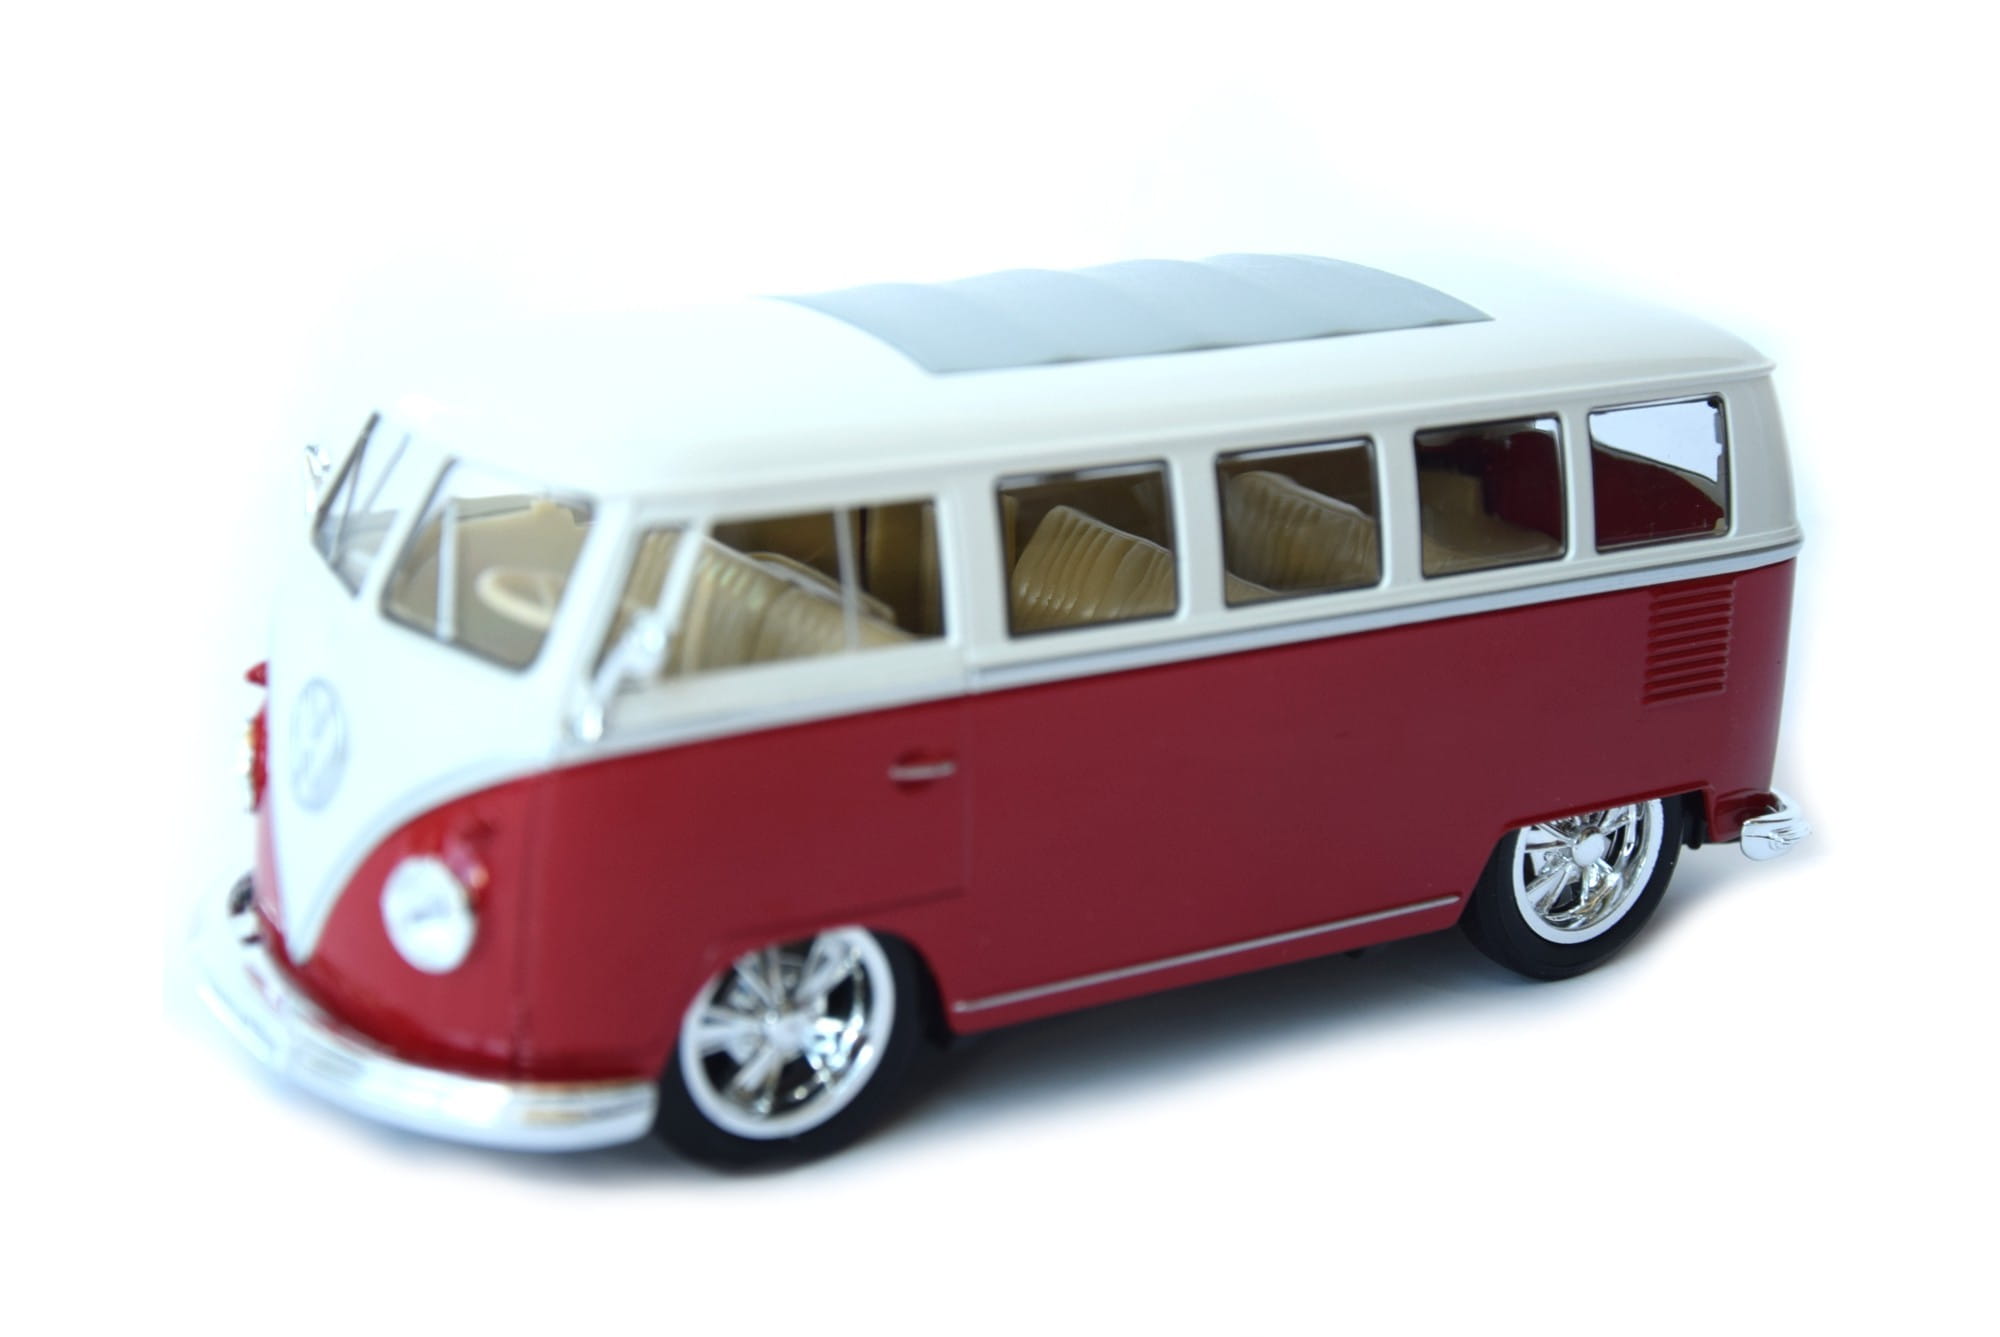 Welly Modellauto 1:24 1963 VW Volkswagen Classical T1 Bus Hotrider Rot-Weiss